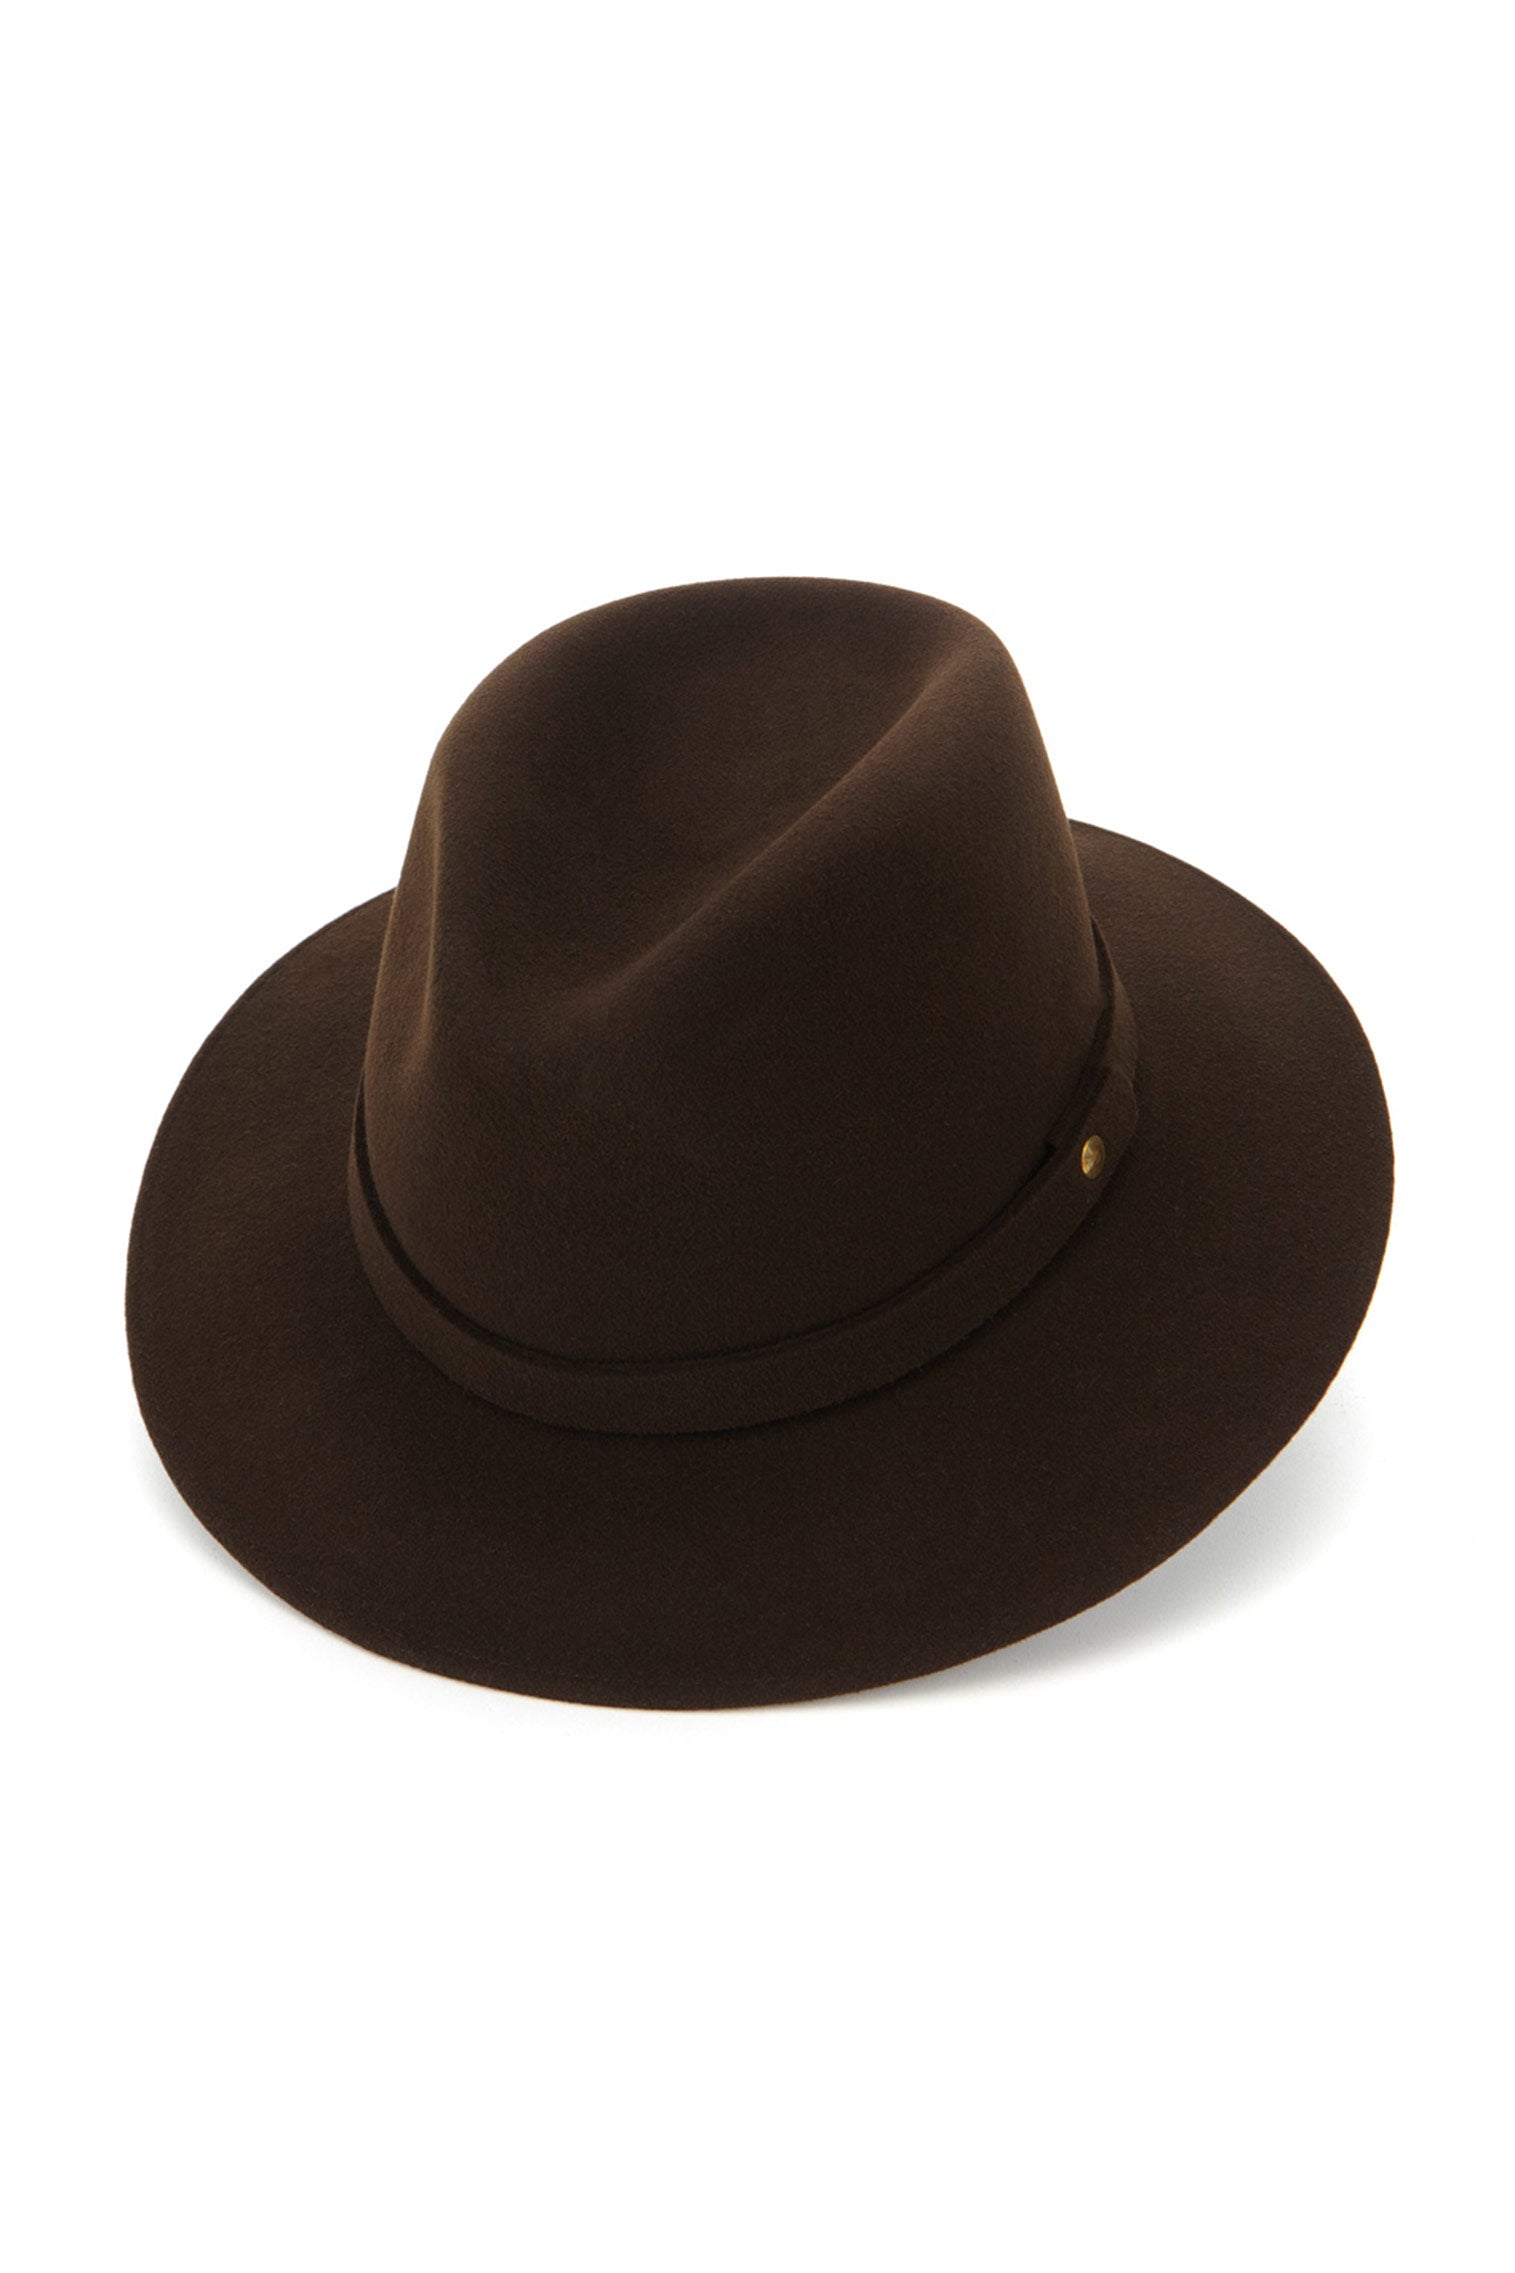 Nomad Rollable Trilby - All Ready to Wear - Lock & Co. Hatters London UK